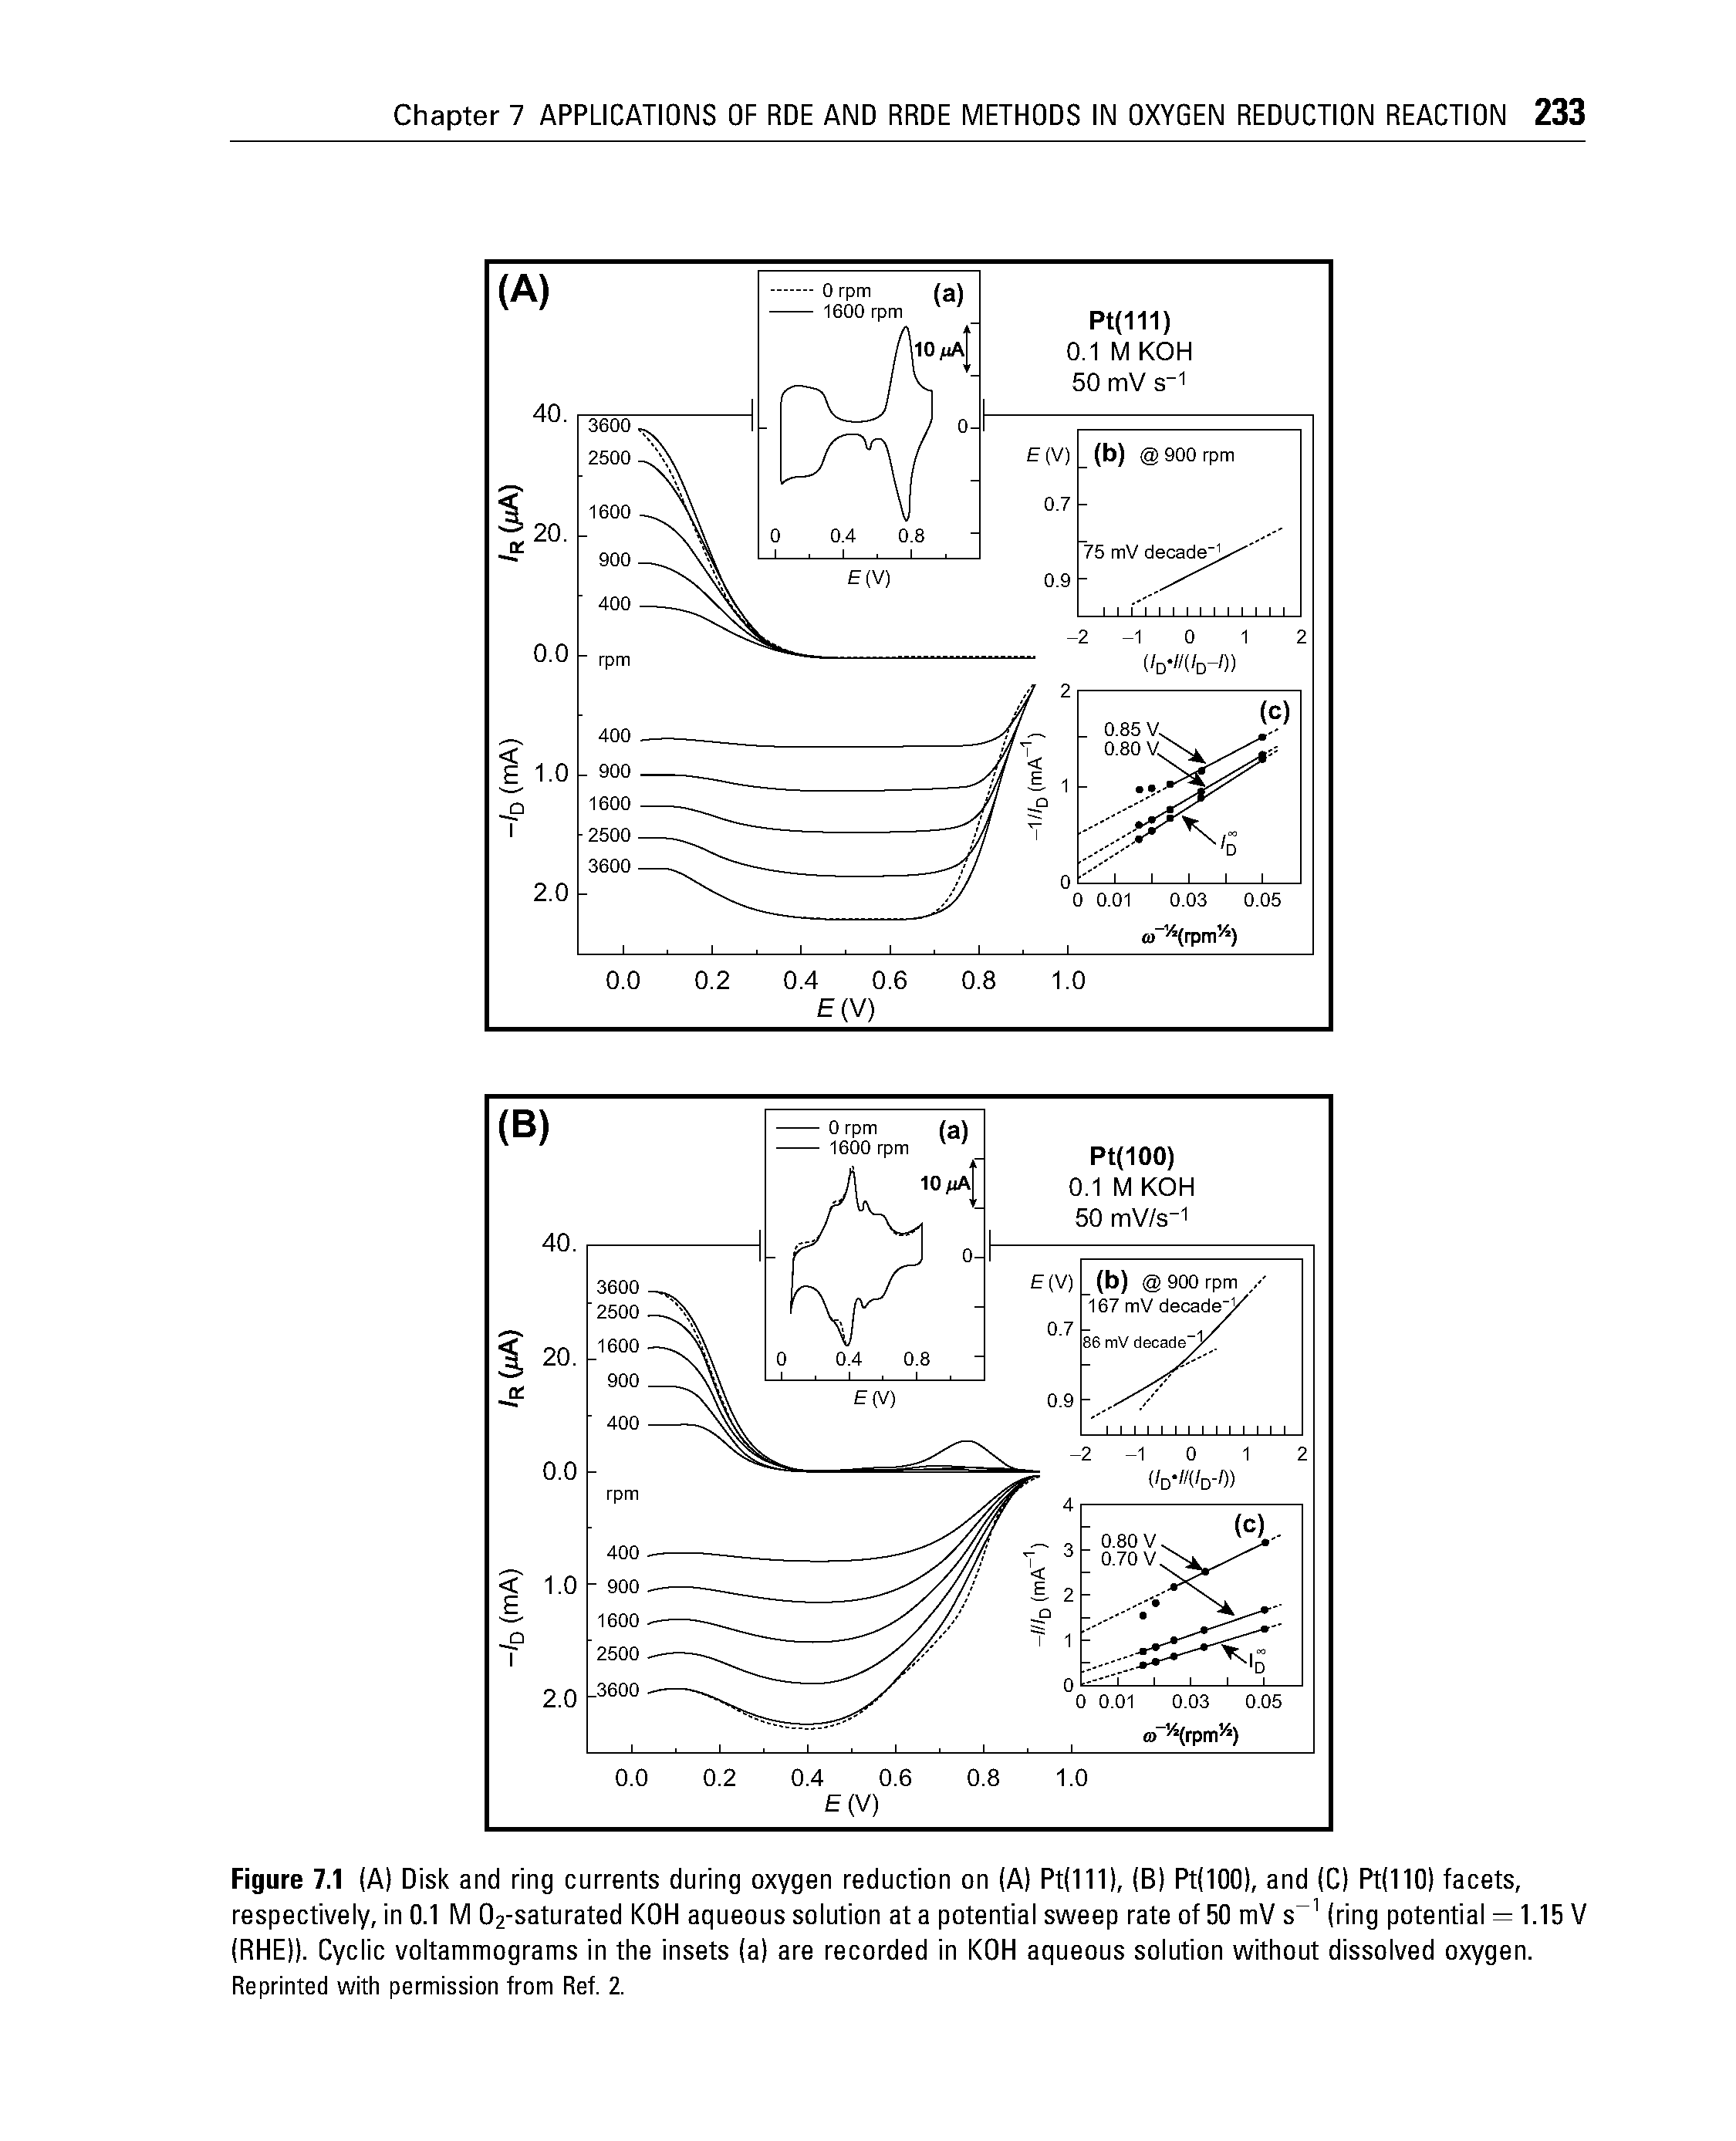 Figure 7.1 (A) Disk and ring currents during oxygen reduction on (A) Pt(111), (B) Pt(IOO), and (C) Pt(110) facets, respectively, in 0.1 M Oa-saturated KOH aqueous solution at a potential sweep rate of 50 mV s (ring potential = 1.15 V (RHE)). Cyclic voltammograms in the insets (a) are recorded in KOH aqueous solution without dissolved oxygen. Reprinted with permission from Ref. 2.